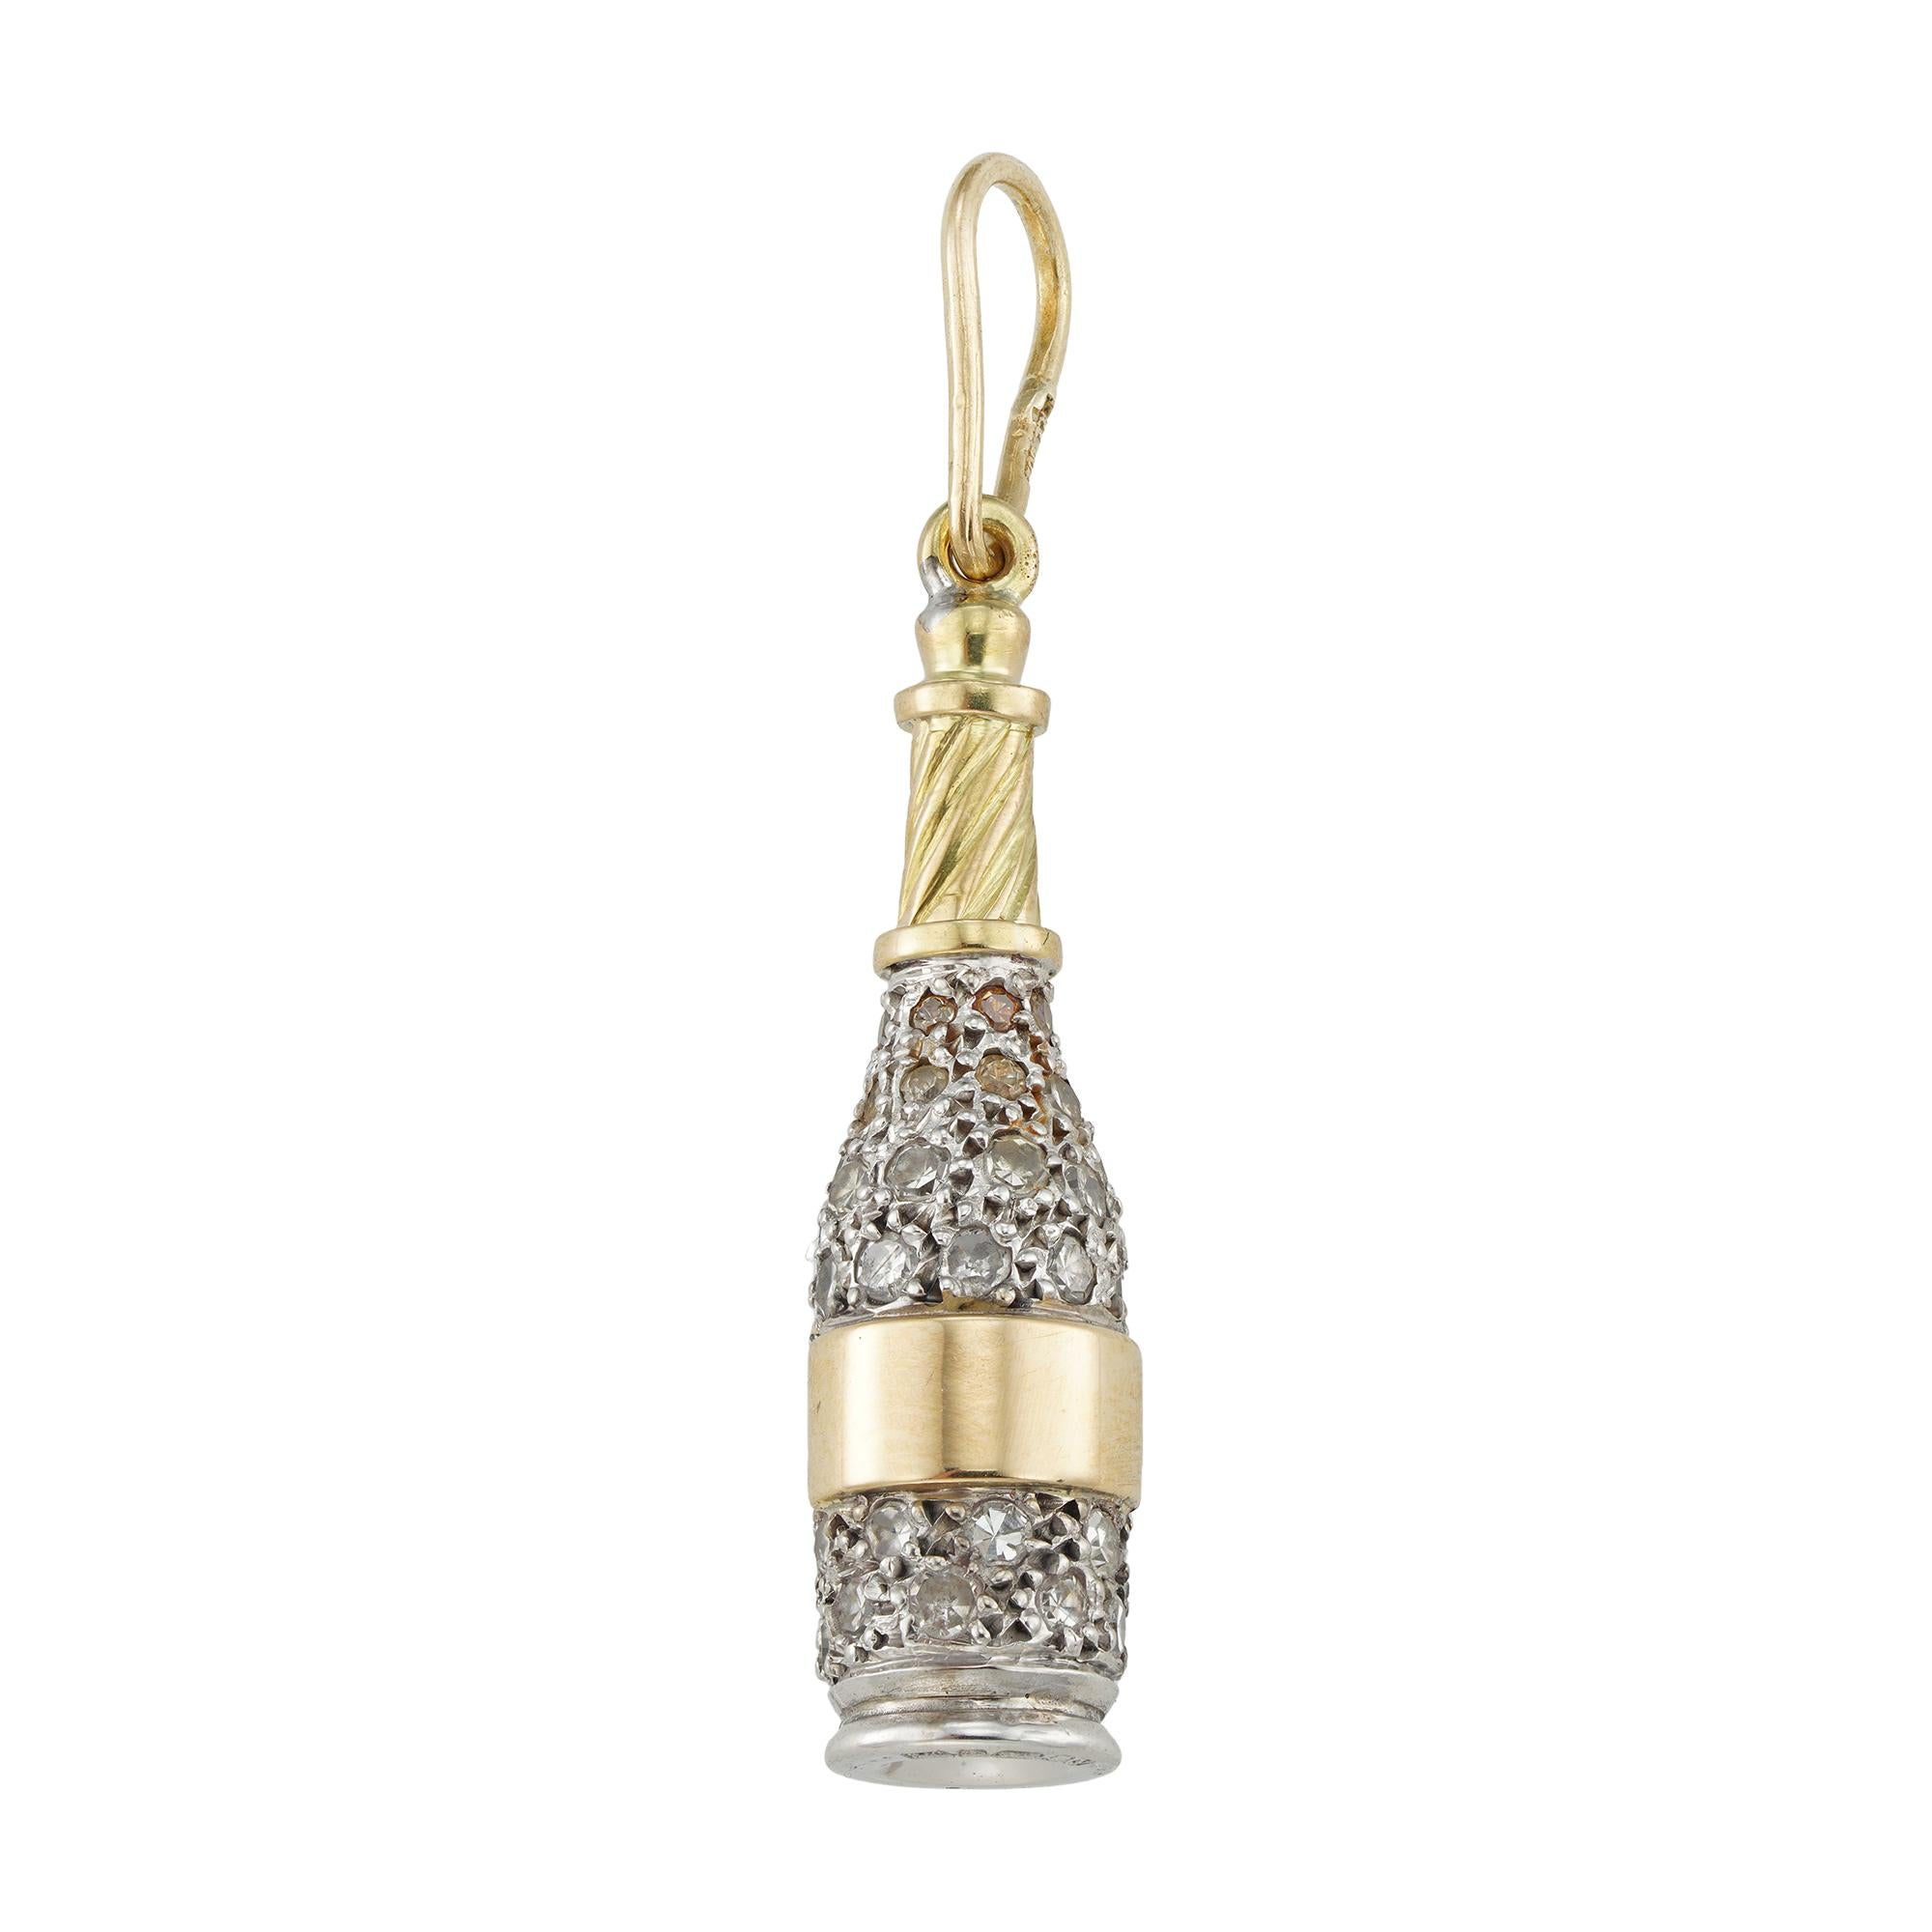 A diamond-set champagne bottle pendant, the realistically carved bottle set throught with small Swiss-cut diamonds estimated to weigh 0.4 carats in total, all mounted in white and yellow gold and suspended by gold pendant loop, circa 1950, later